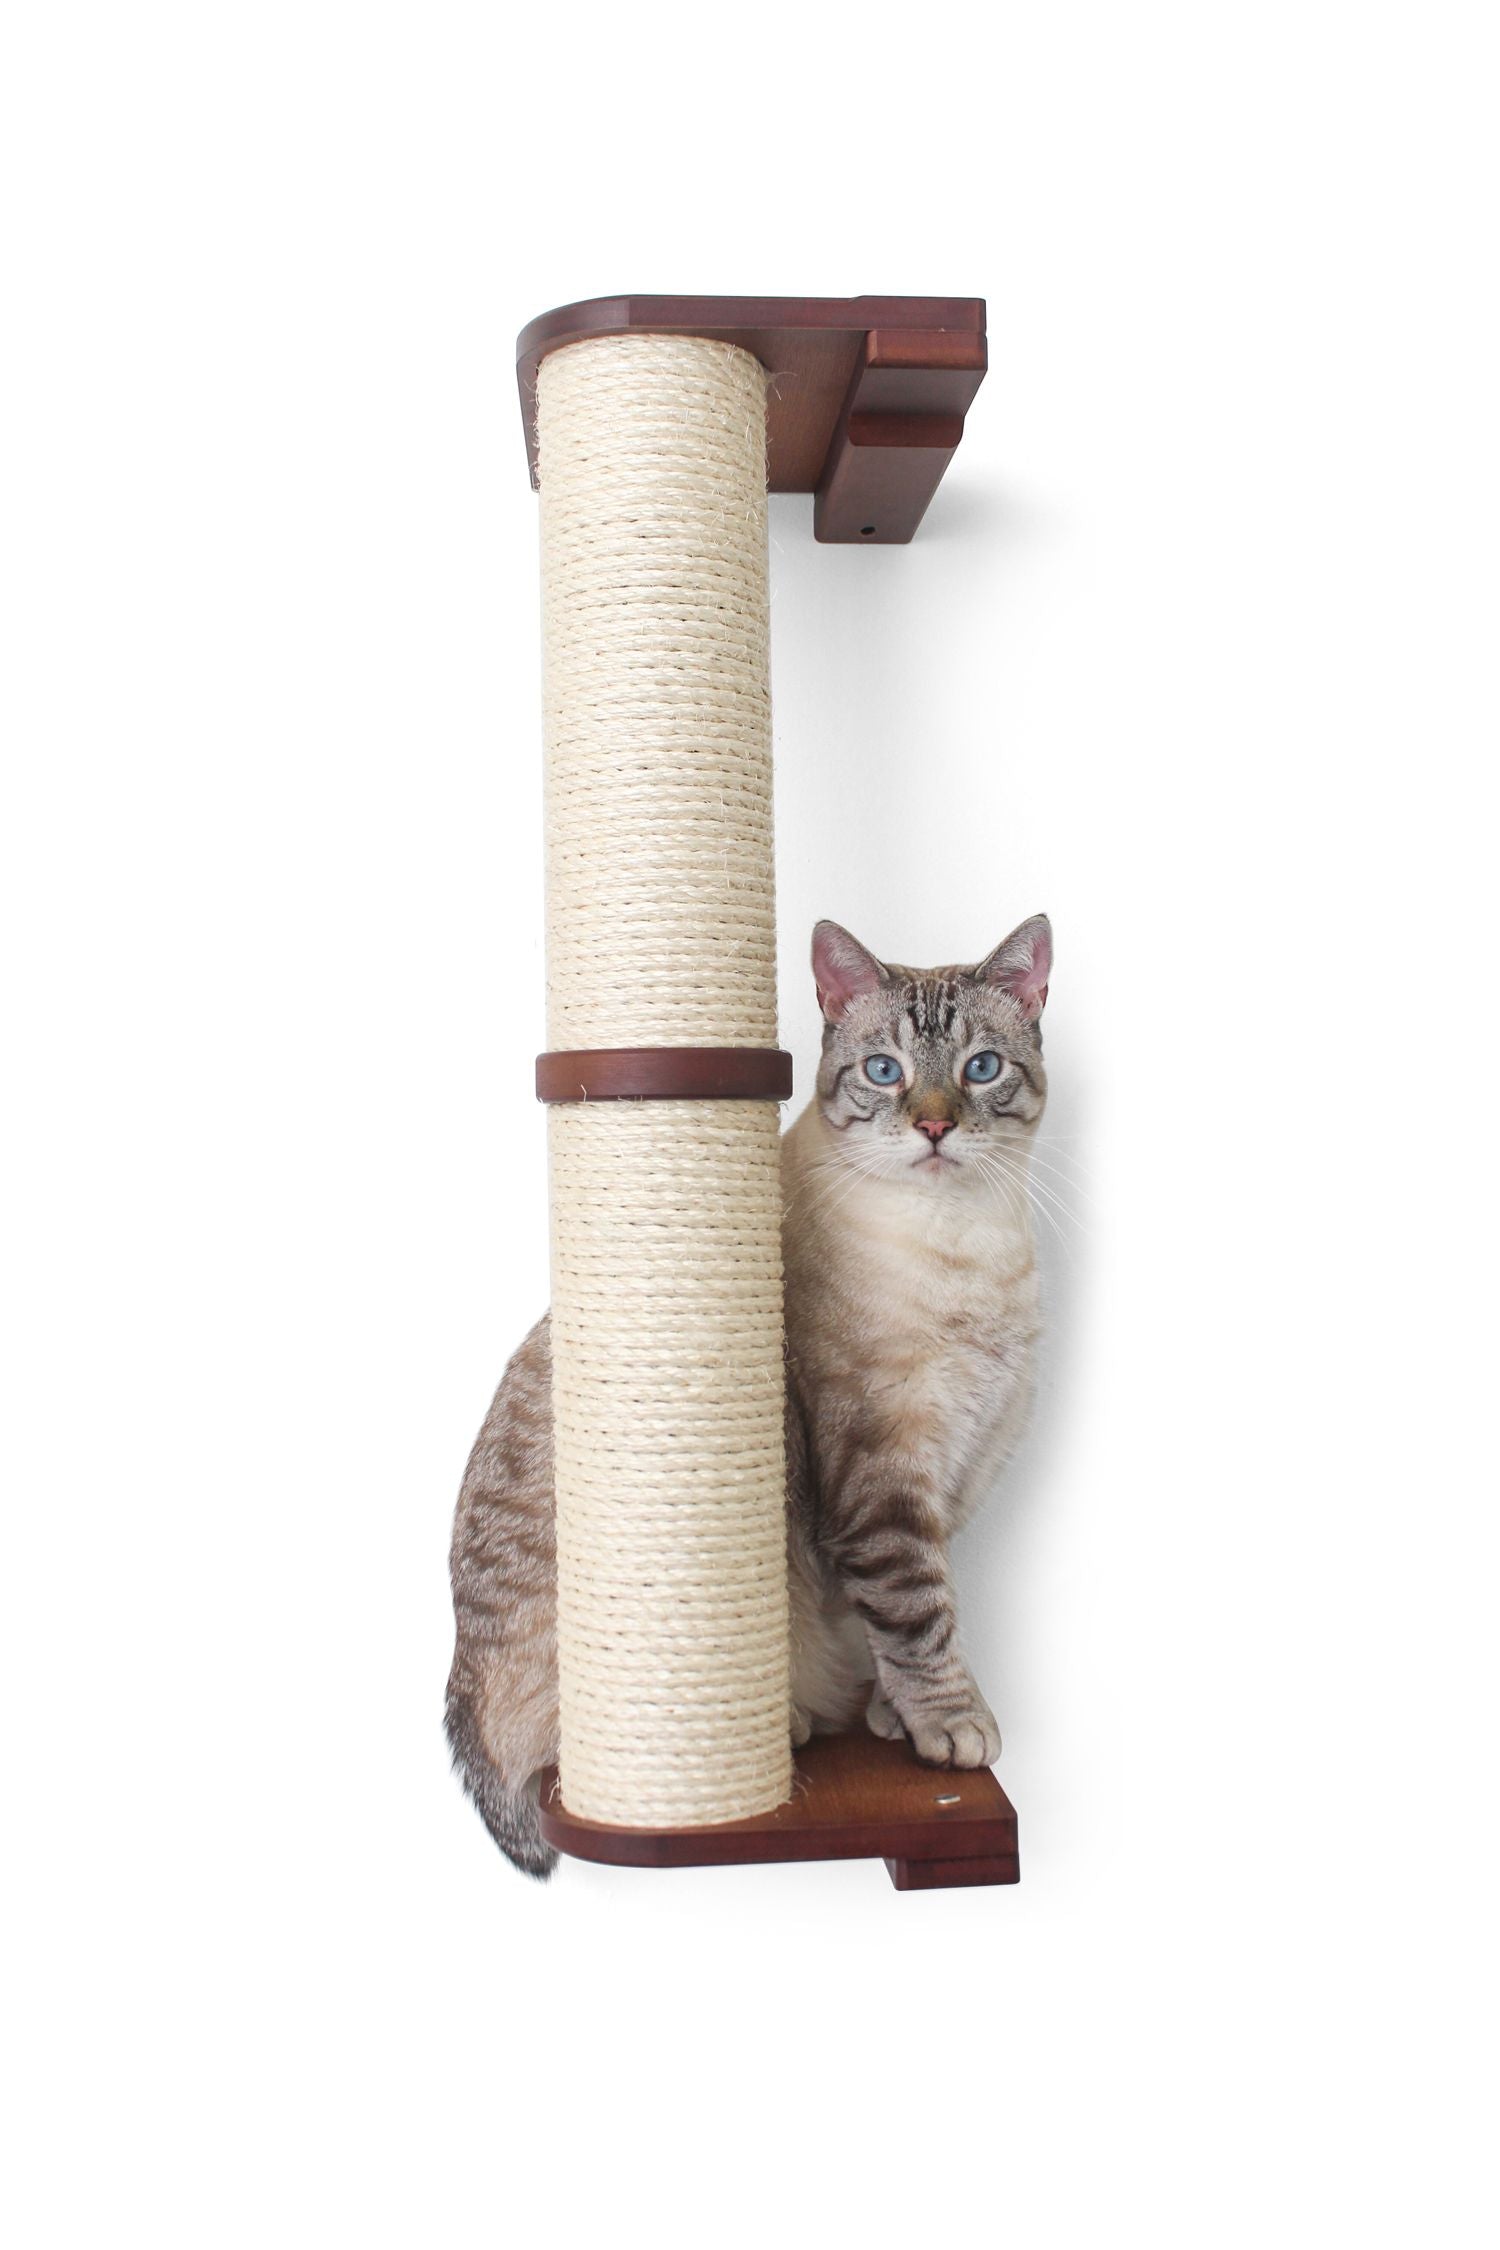 This photo displays our cat sitting at the bottom of a Sisal Pole. This two tier Sisal Pole is in English Chestnut, a dark brown stain.